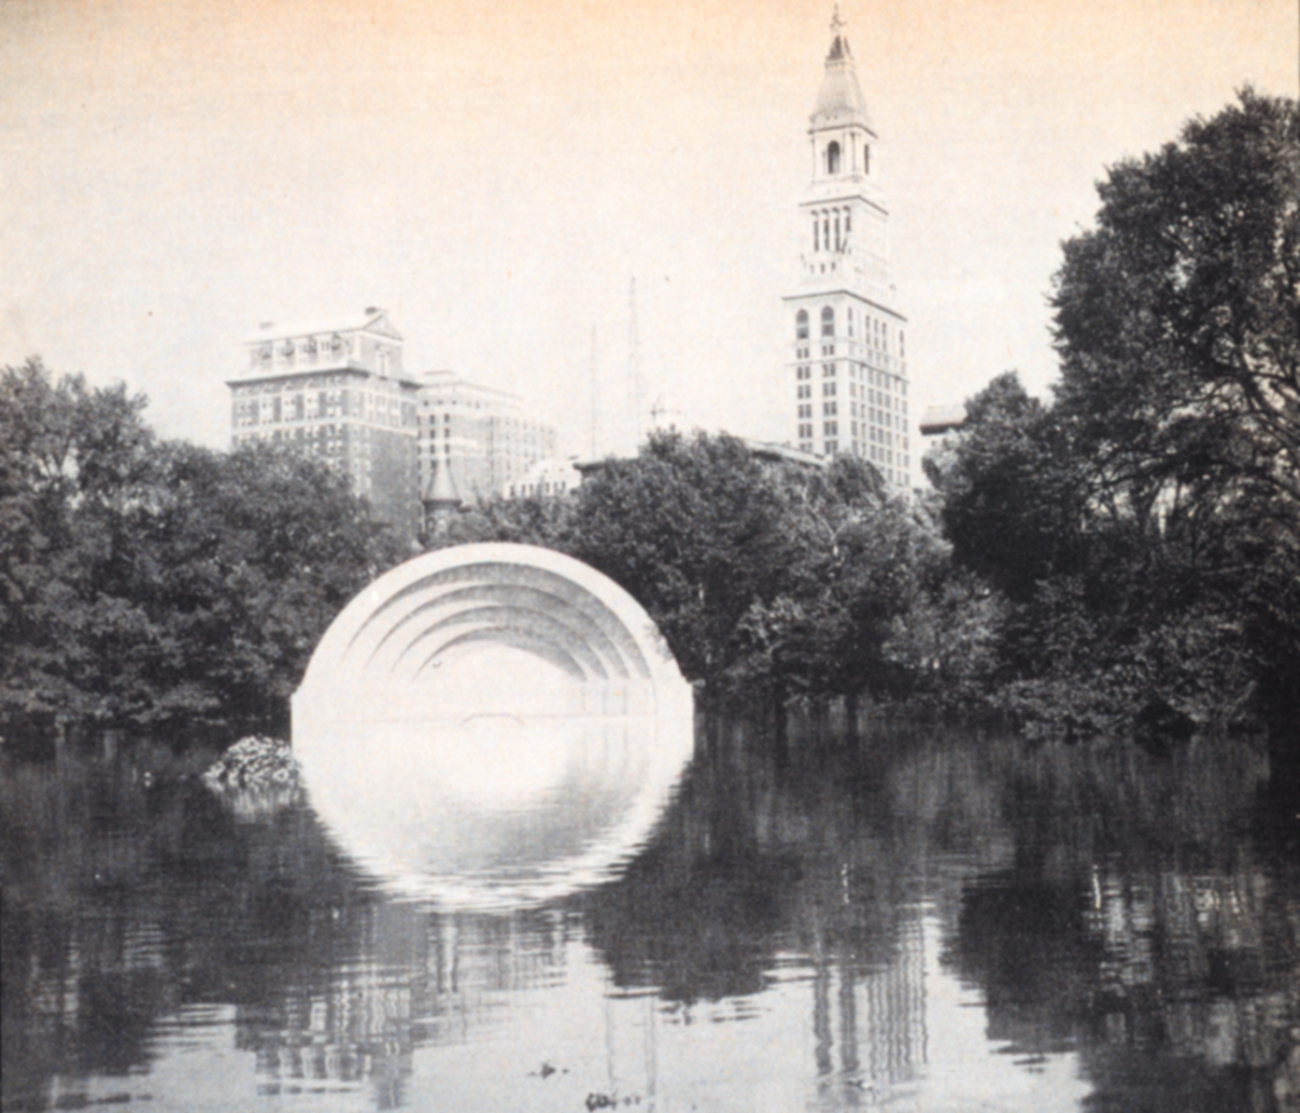 The Music Shell in Bushnell Park which was now functioning as a reflecting pool